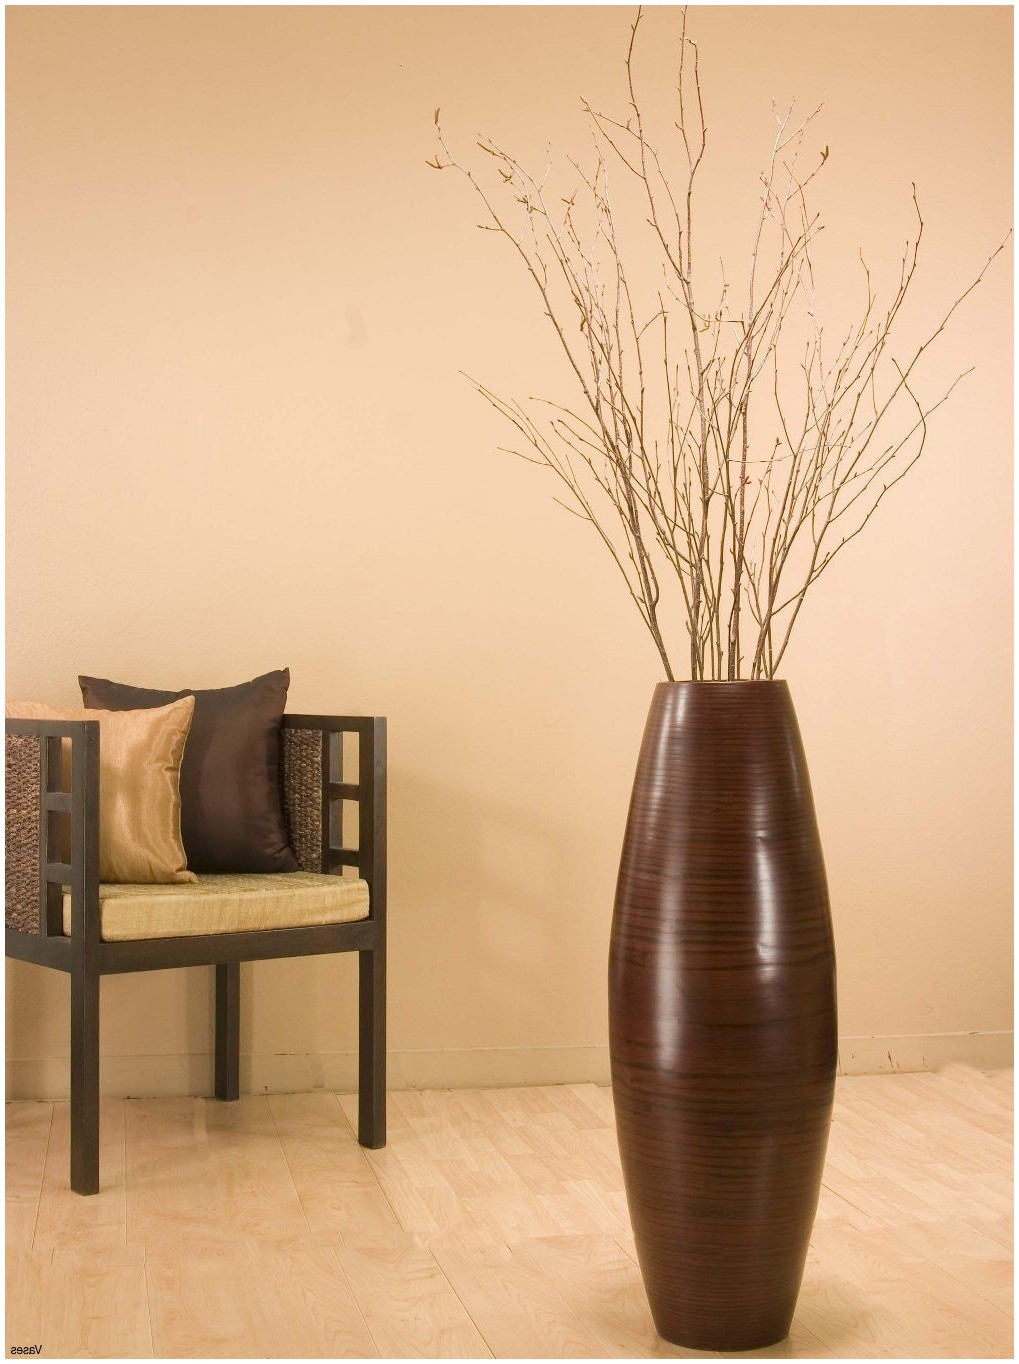 18 Fashionable 30 Inch Tall Floor Vase 2024 free download 30 inch tall floor vase of 21 beau decorative vases anciendemutu org in 712x0qv9hql sl1364 h vases tall green floor decorative standing with branchesi 0d